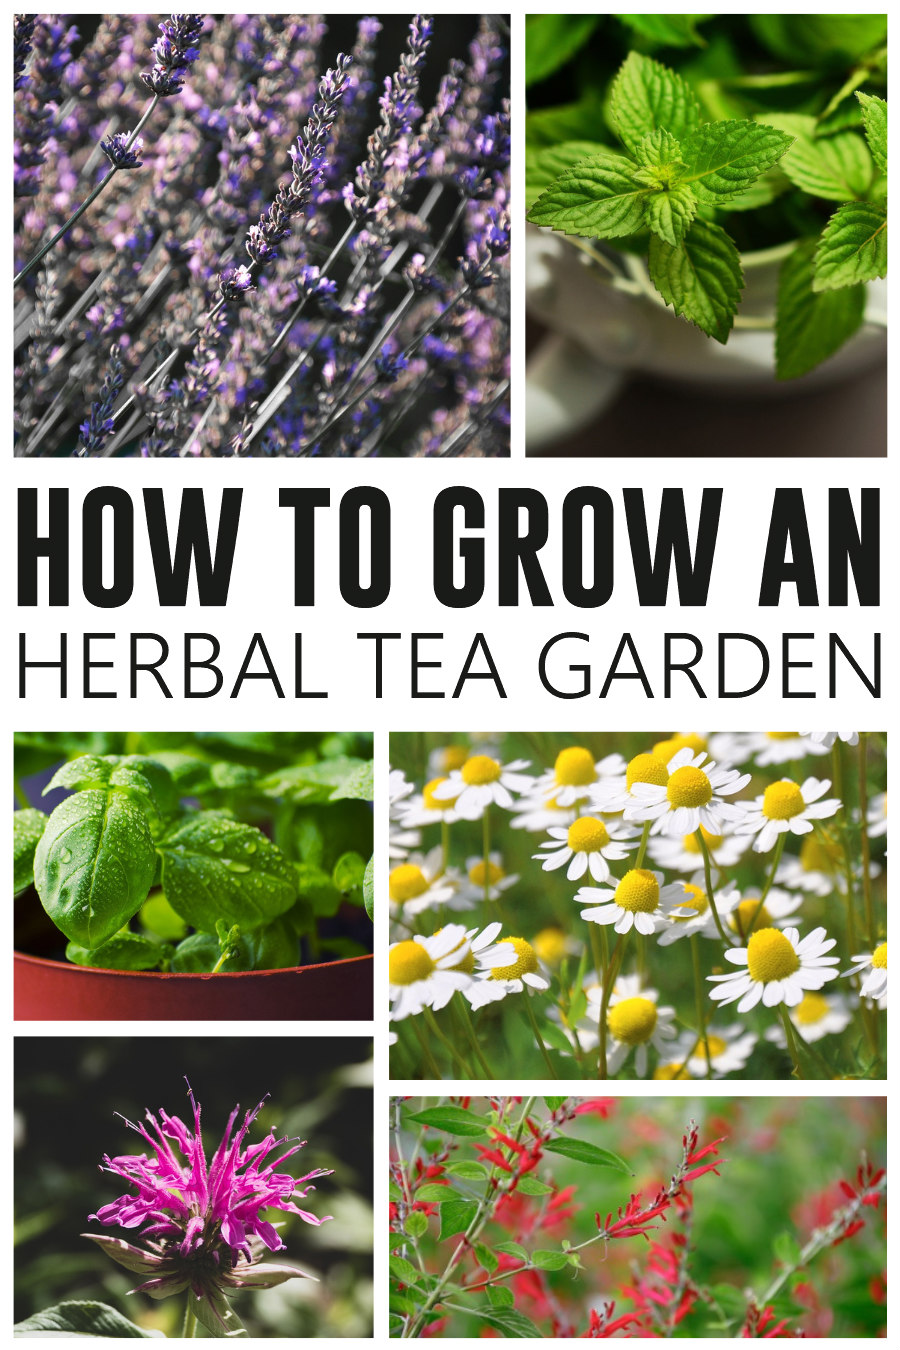 Collage of herbs used to grow an herbal tea garden.